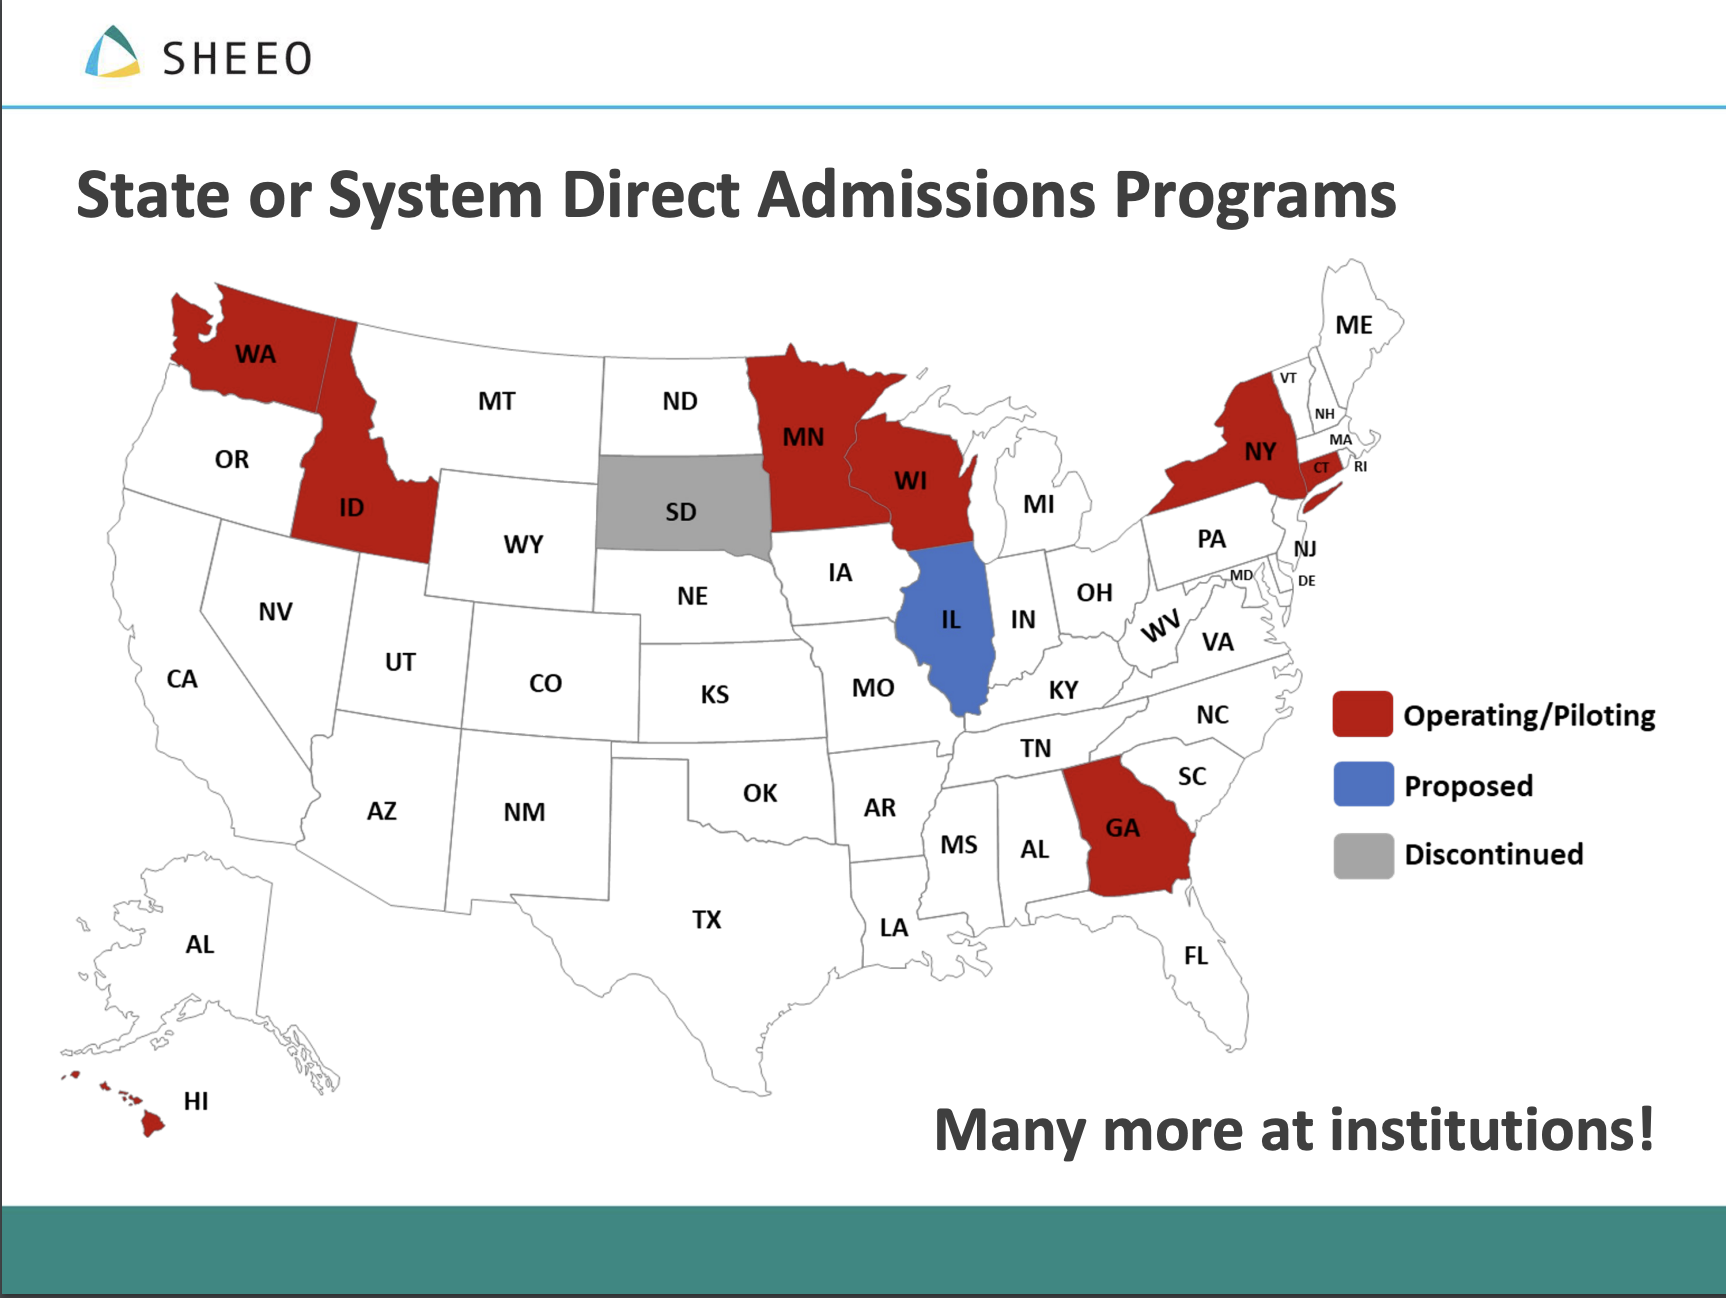 State or System Direct Admissions Programs image, a map of the US with some states colored in red, blue or gray.